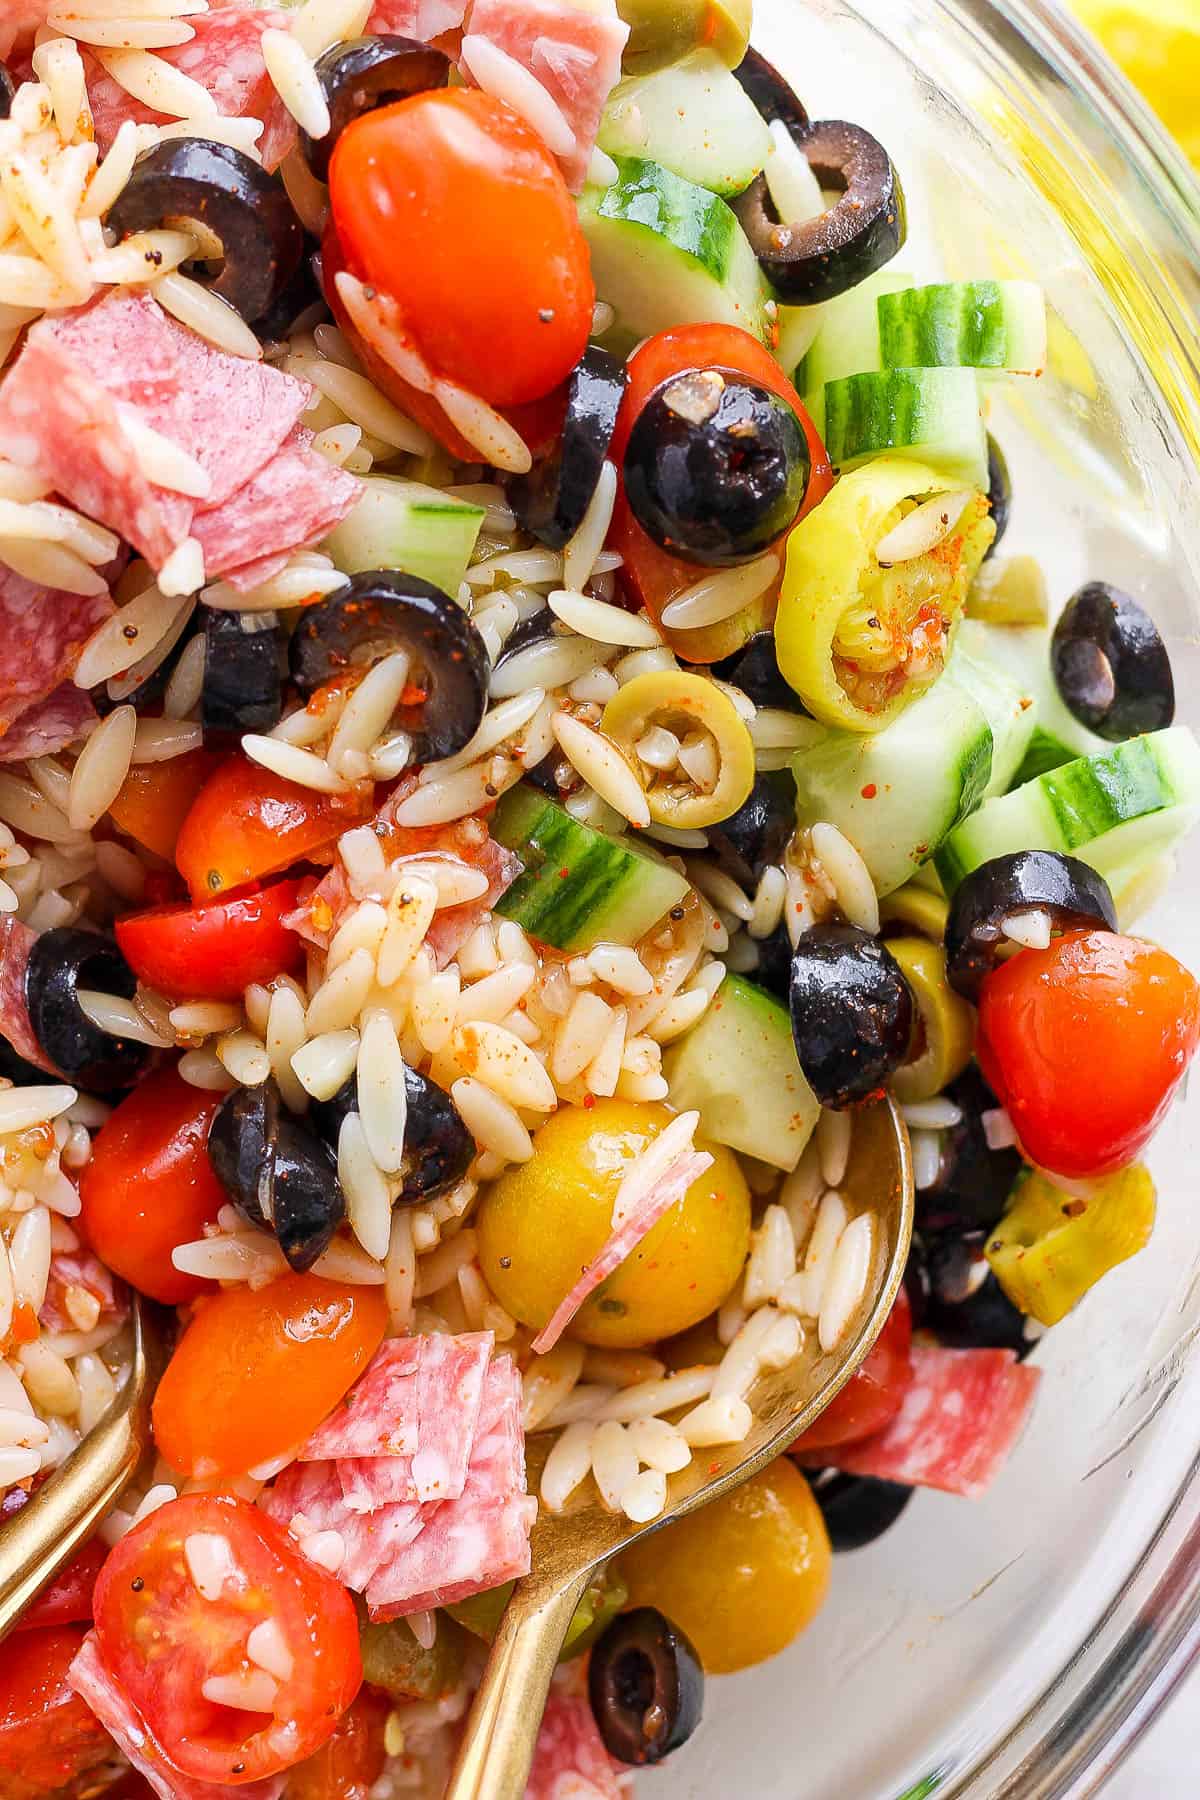 Orzo salad in a bowl.